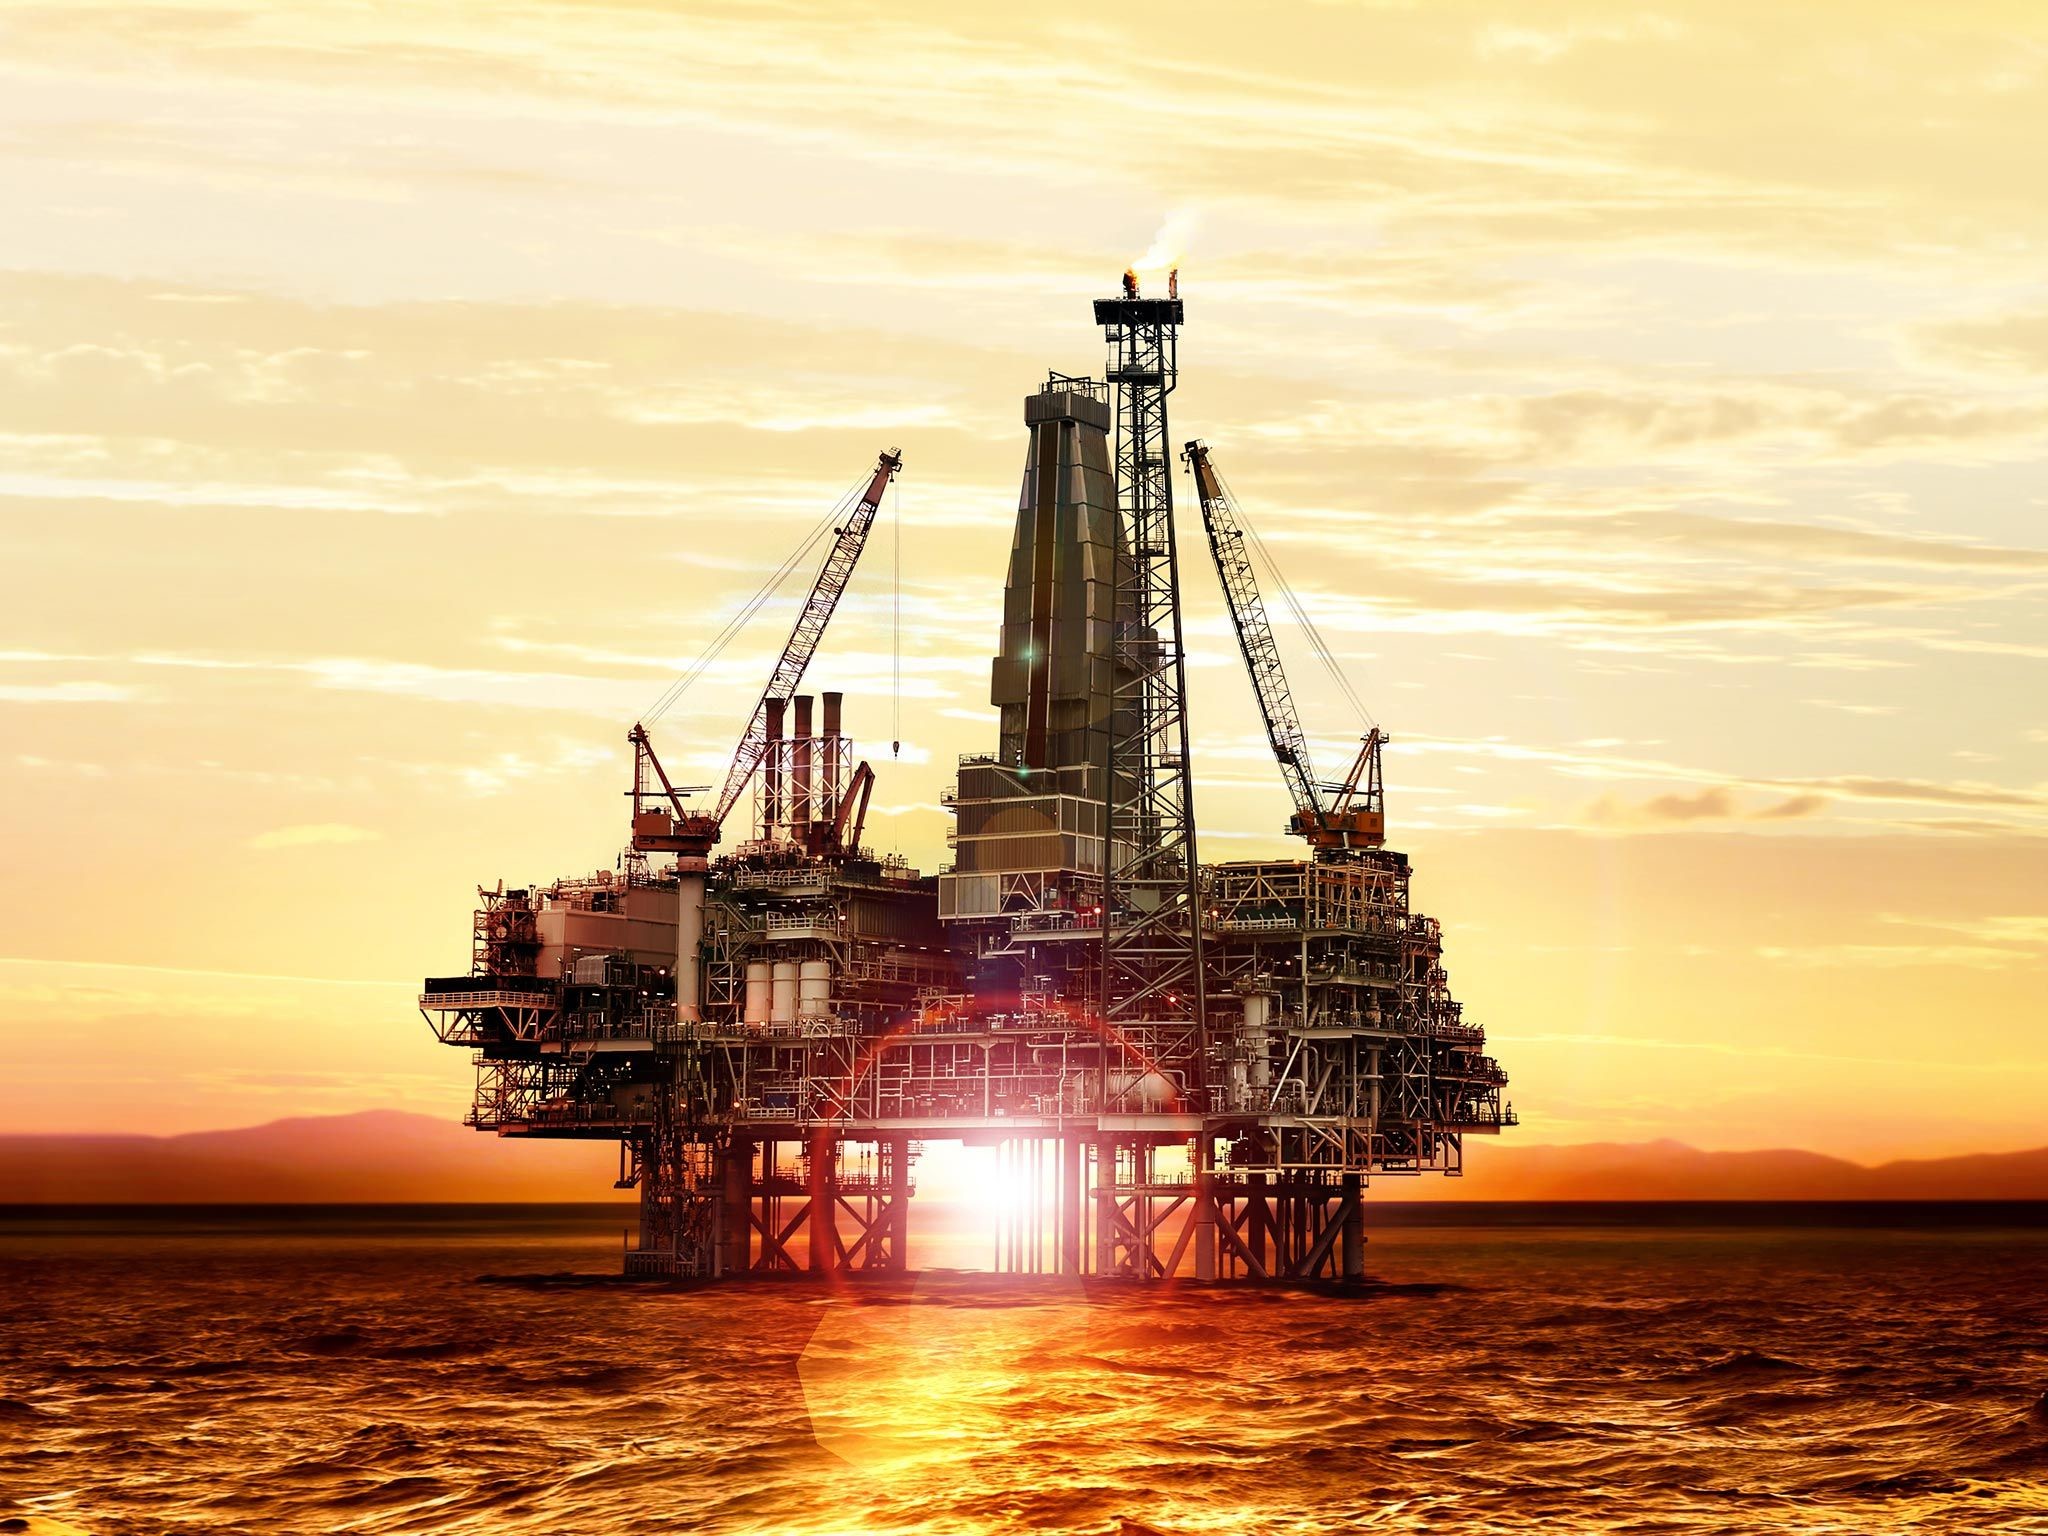 oil rig wallpaper,oil rig,offshore drilling,vehicle,semi submersible,jackup rig